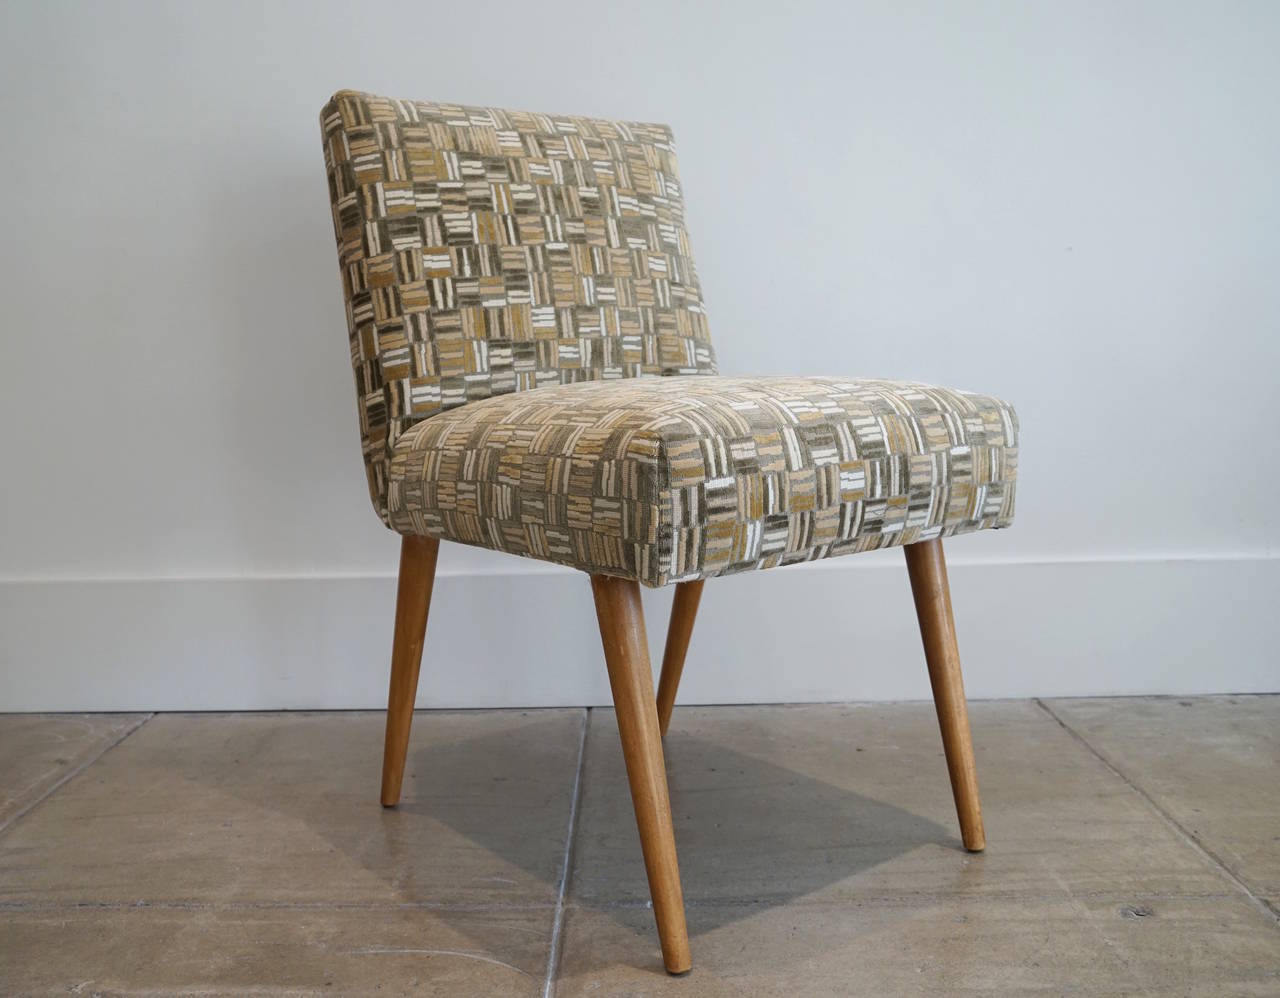 T.H. Robsjohn-Gibbings desk chair for Widdicomb.

Newly upholstered in Lee Jofa, wood cut velvet, (stone).
Springs and webbing also replaced, original finish to the legs.